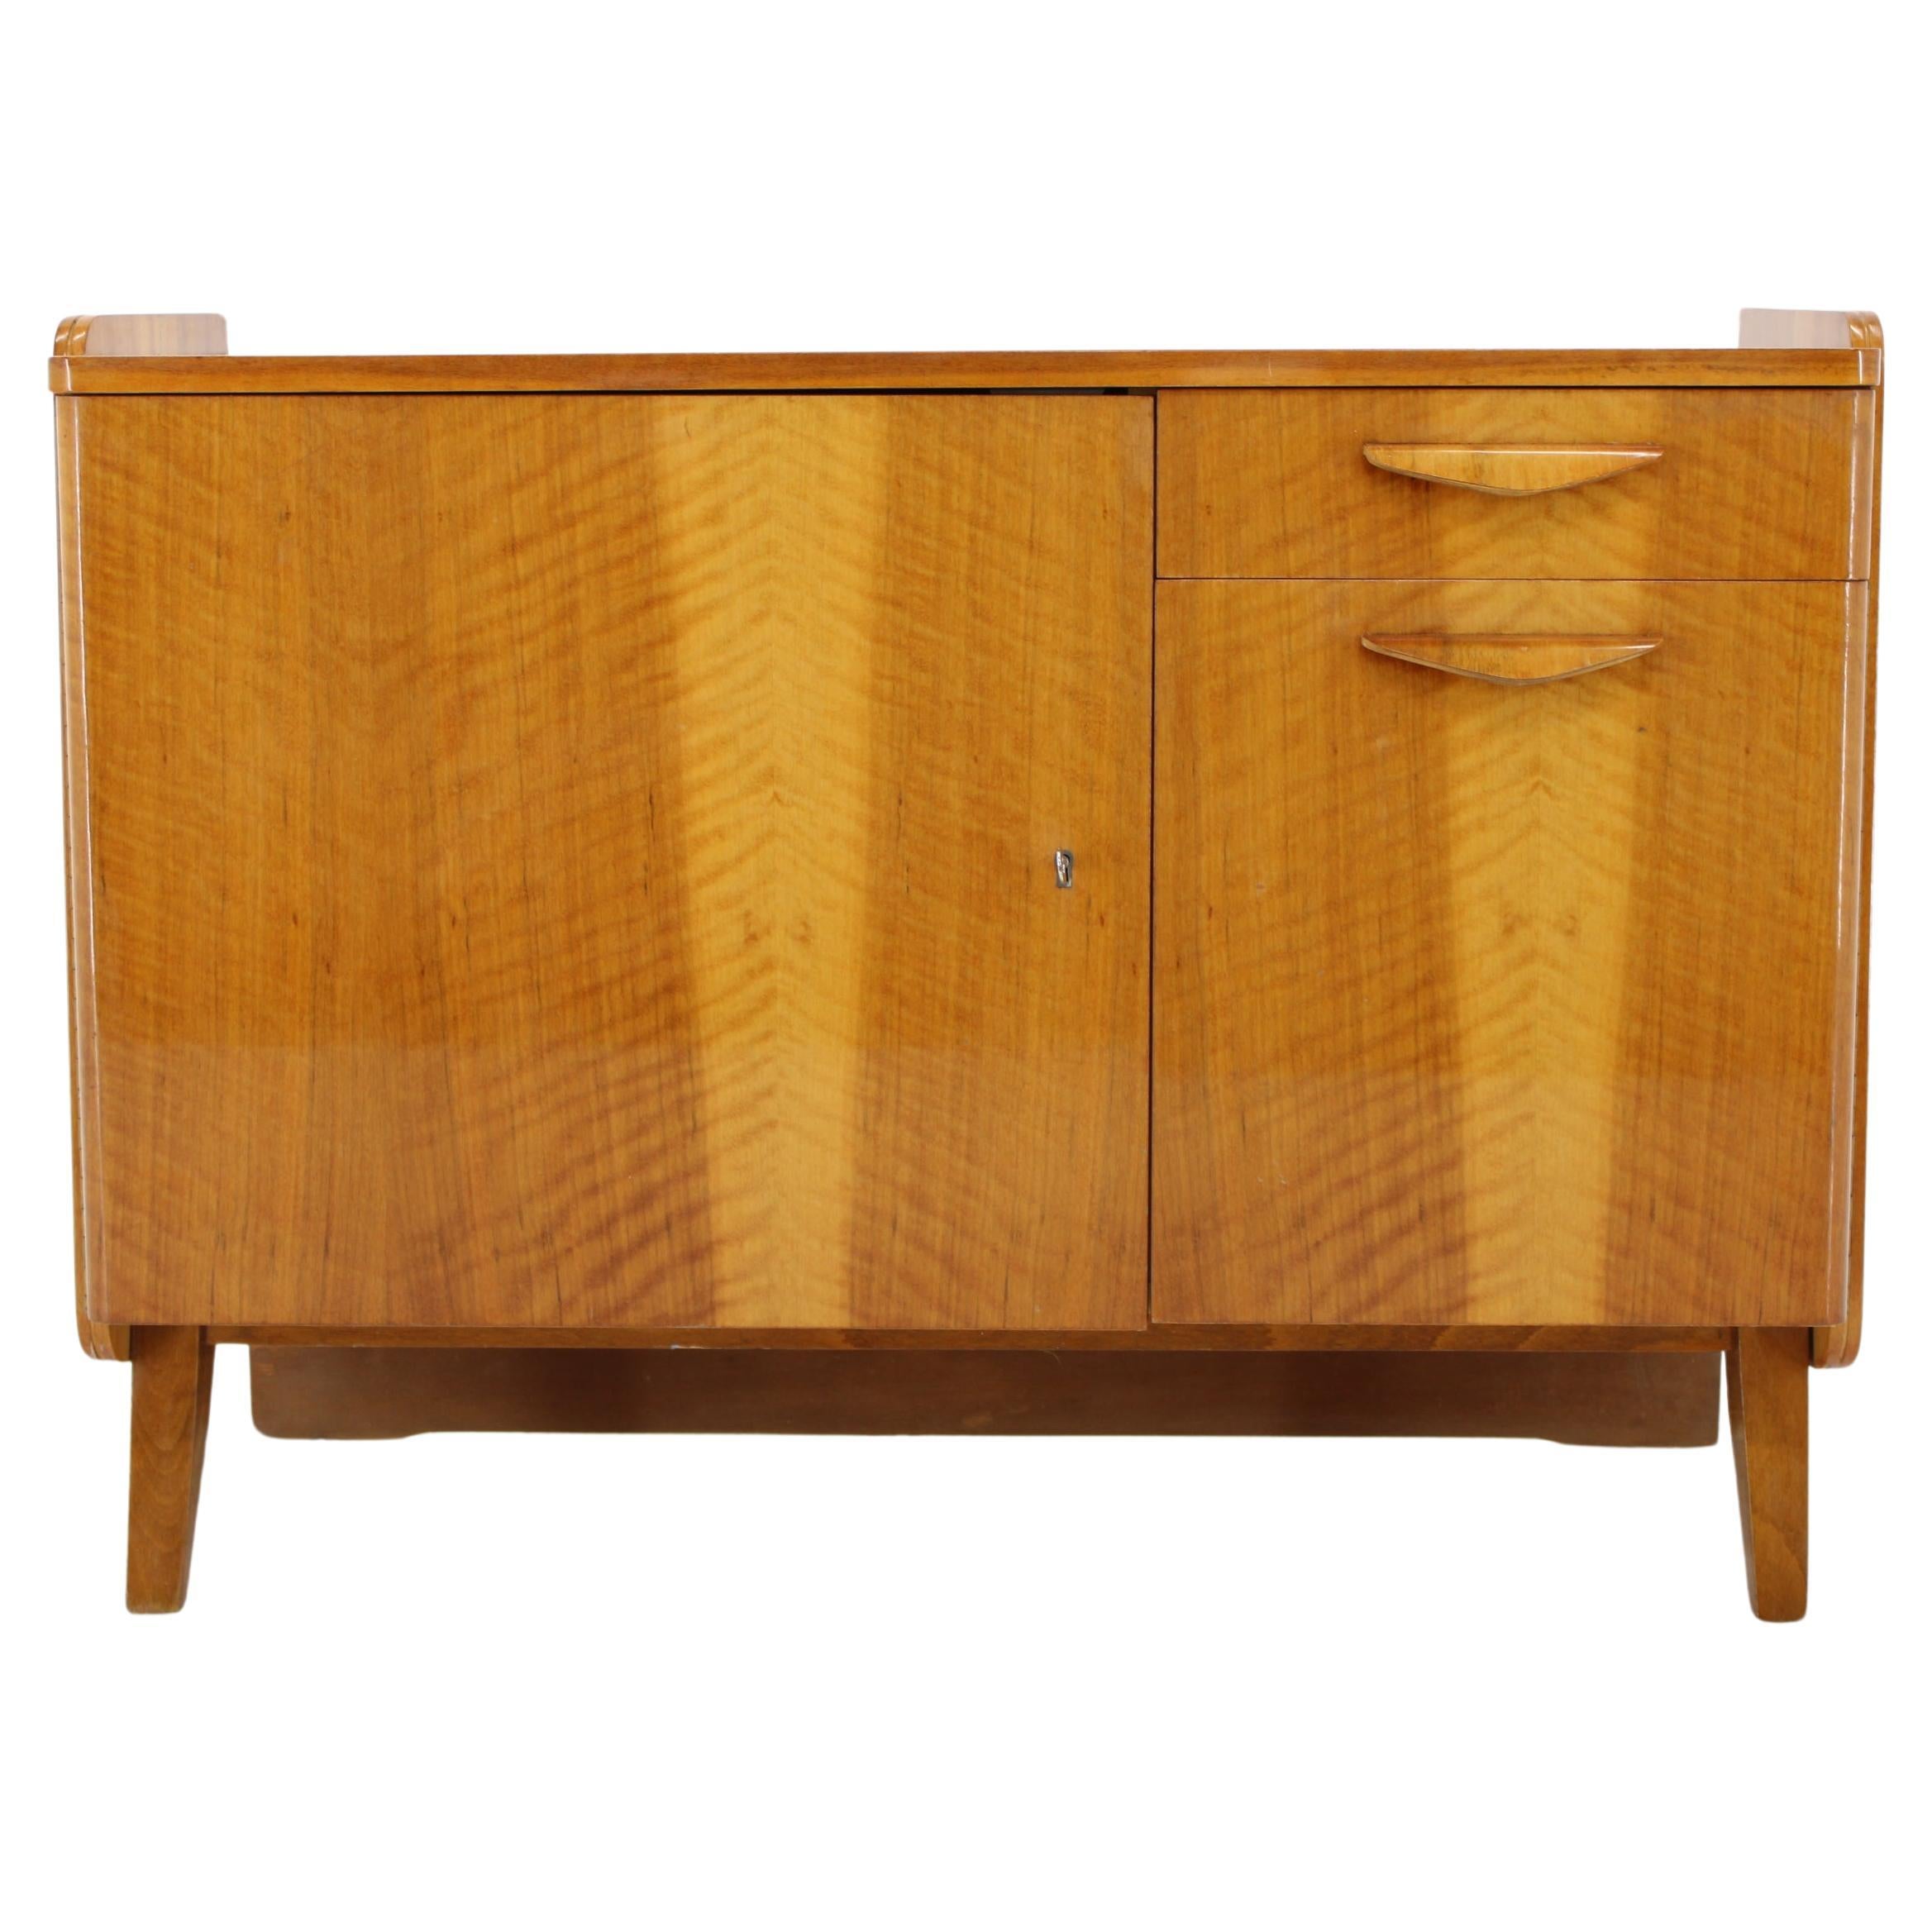 Tatra Nabytok Commodes and Chests of Drawers